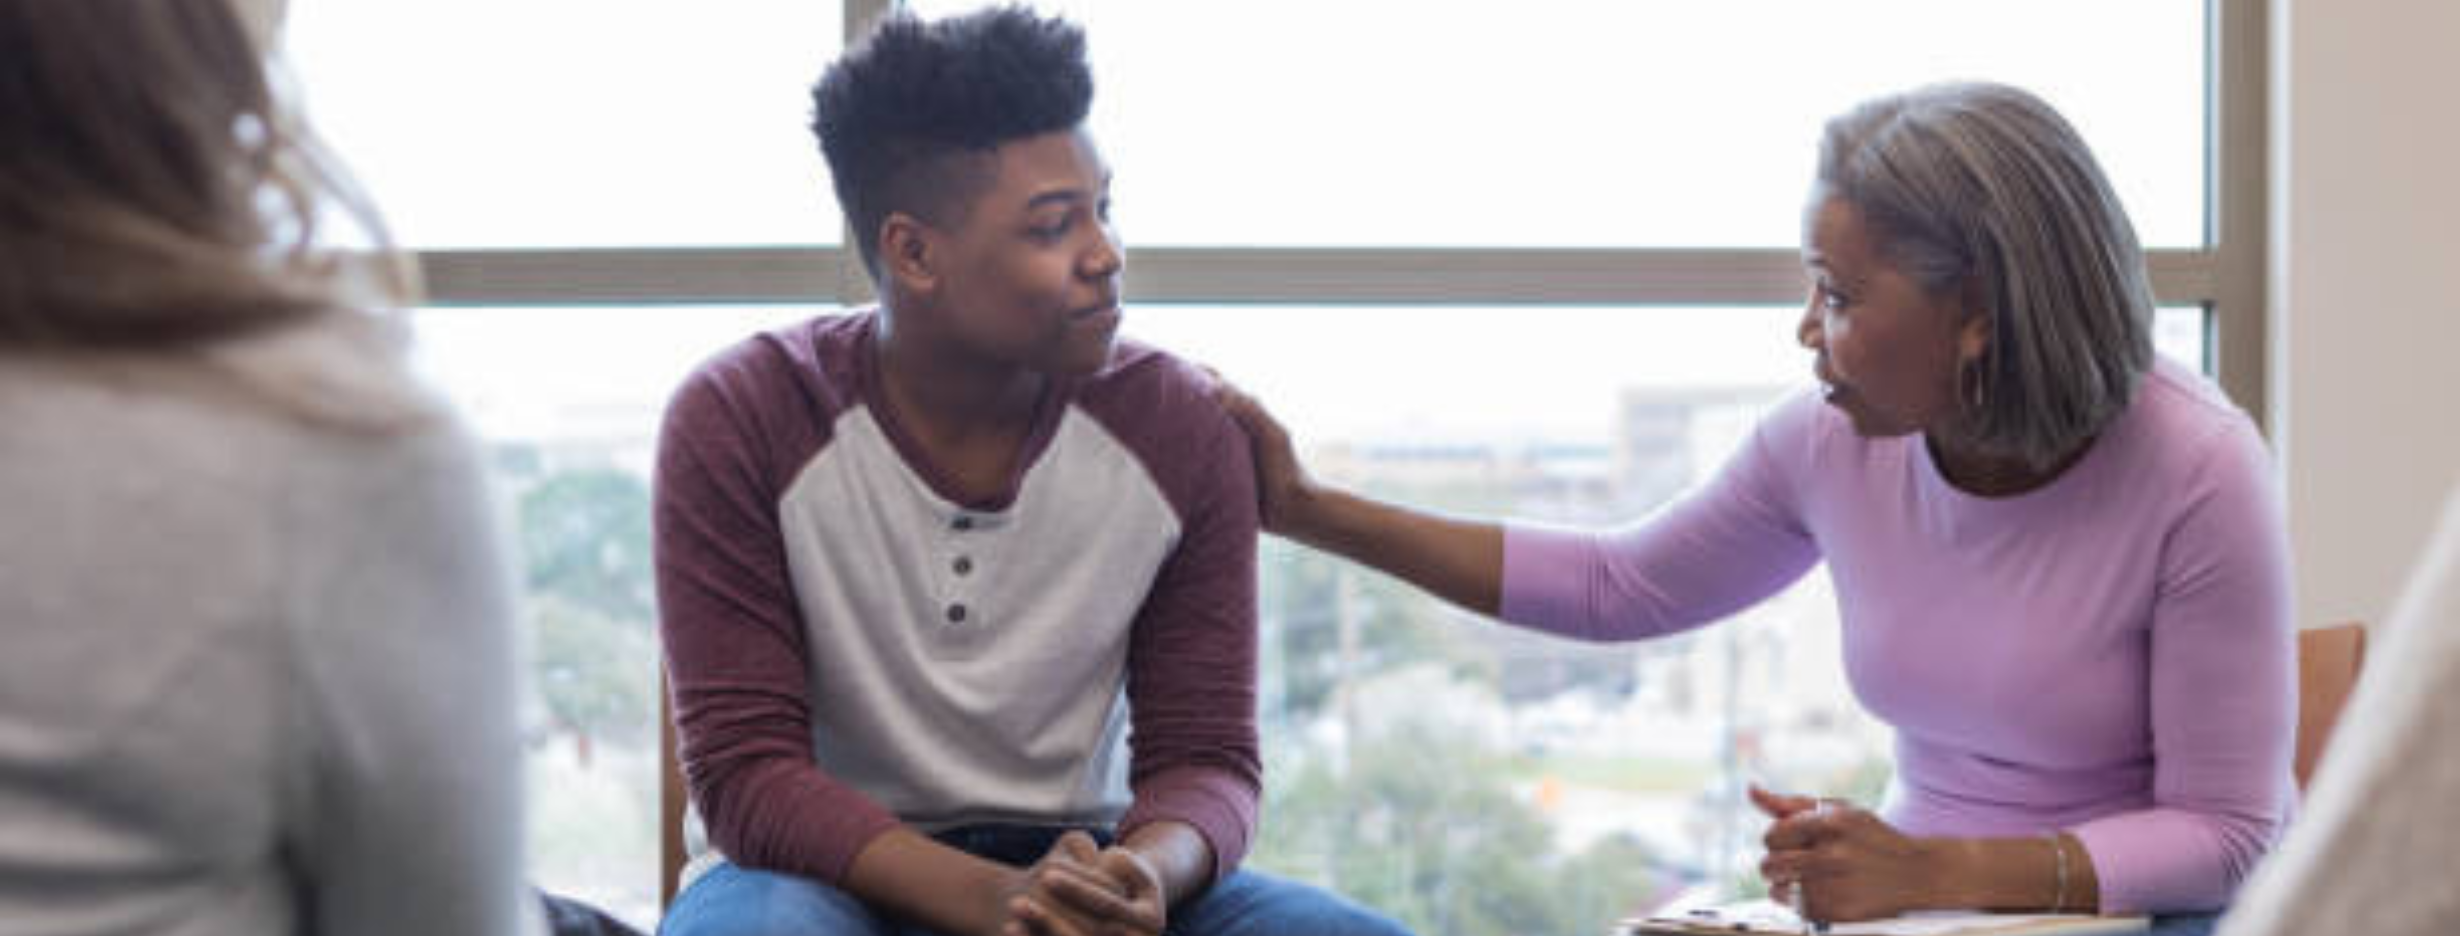 Black teen getting support from adult